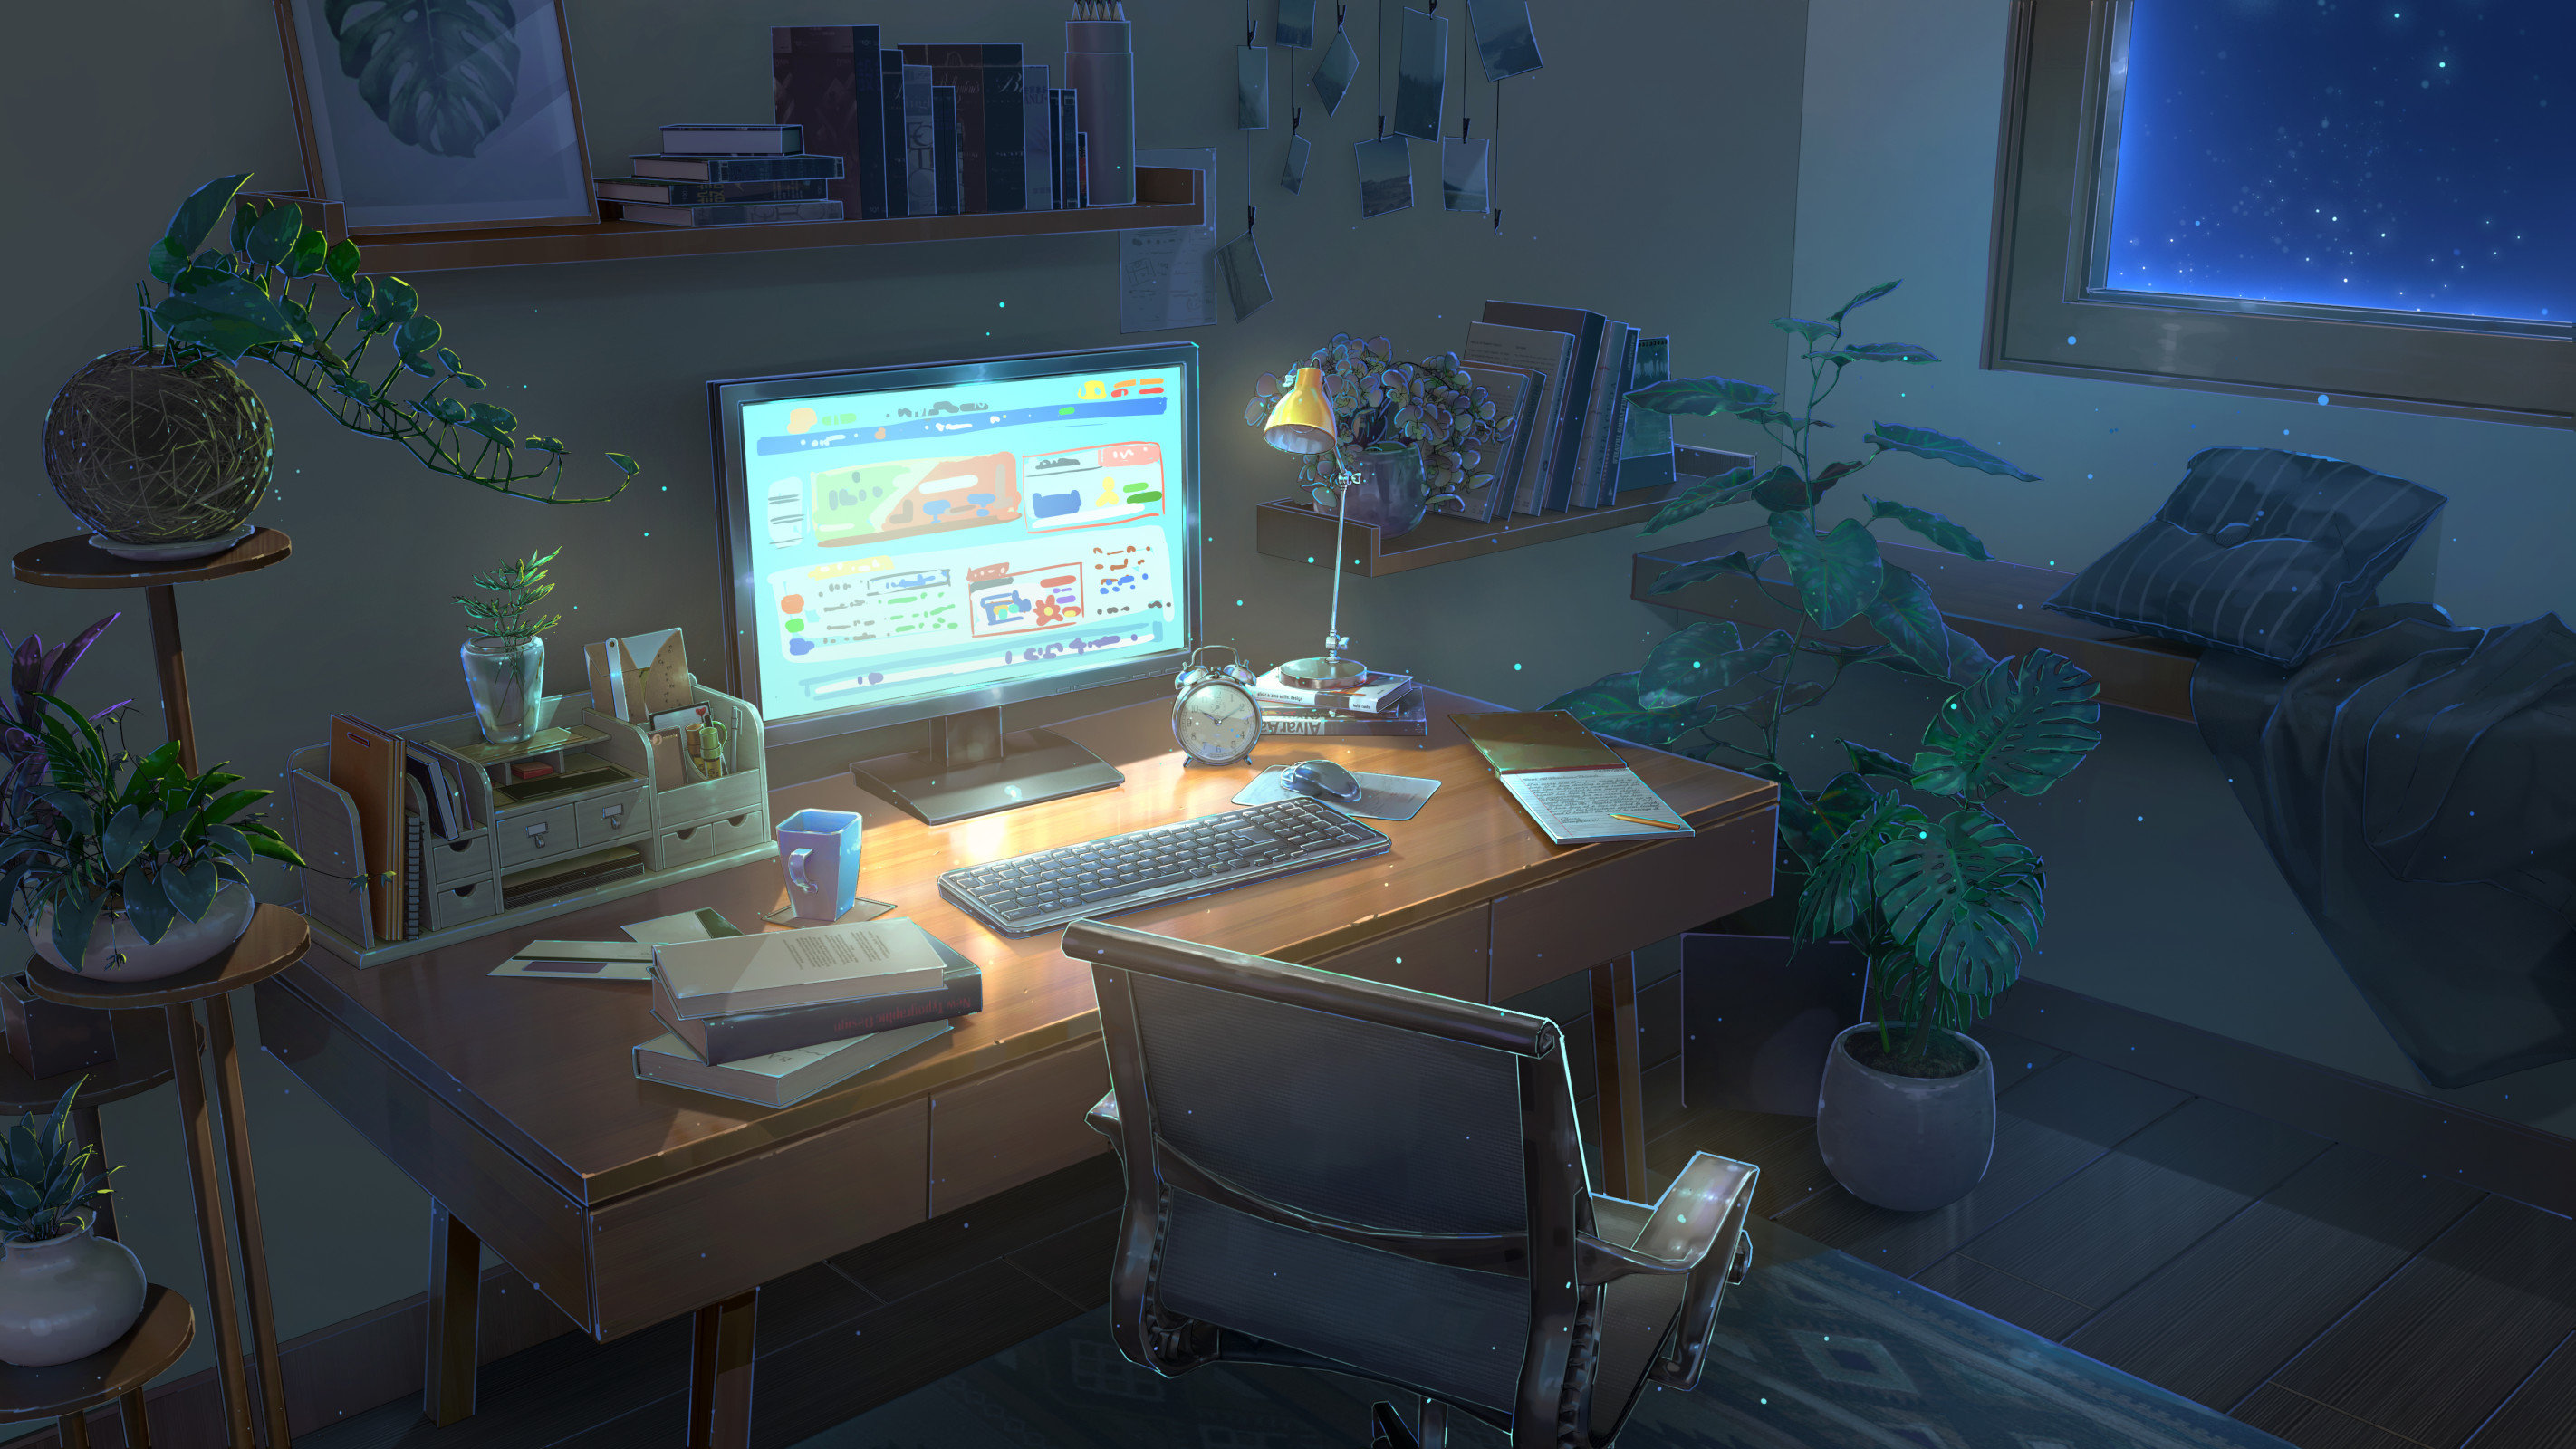 Night Computer Table Plants Plant Pot Keyboards Books Bookshelf Chair Room Interior Monitor Lamp Ind 2844x1600